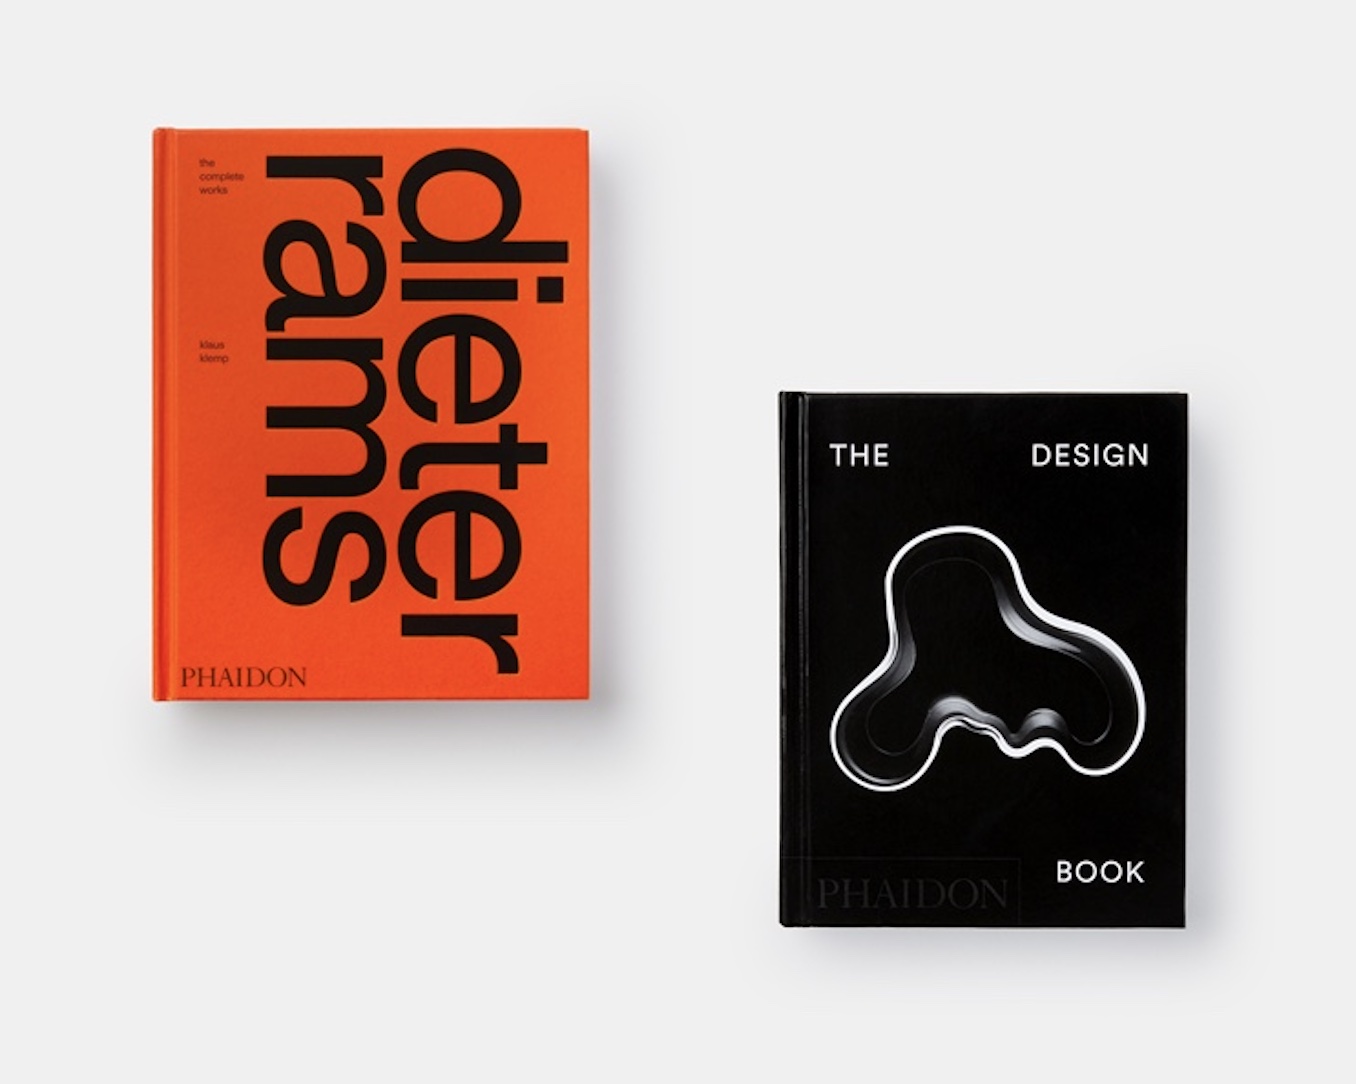 Dieter Rams: The Complete Works and The Design Book